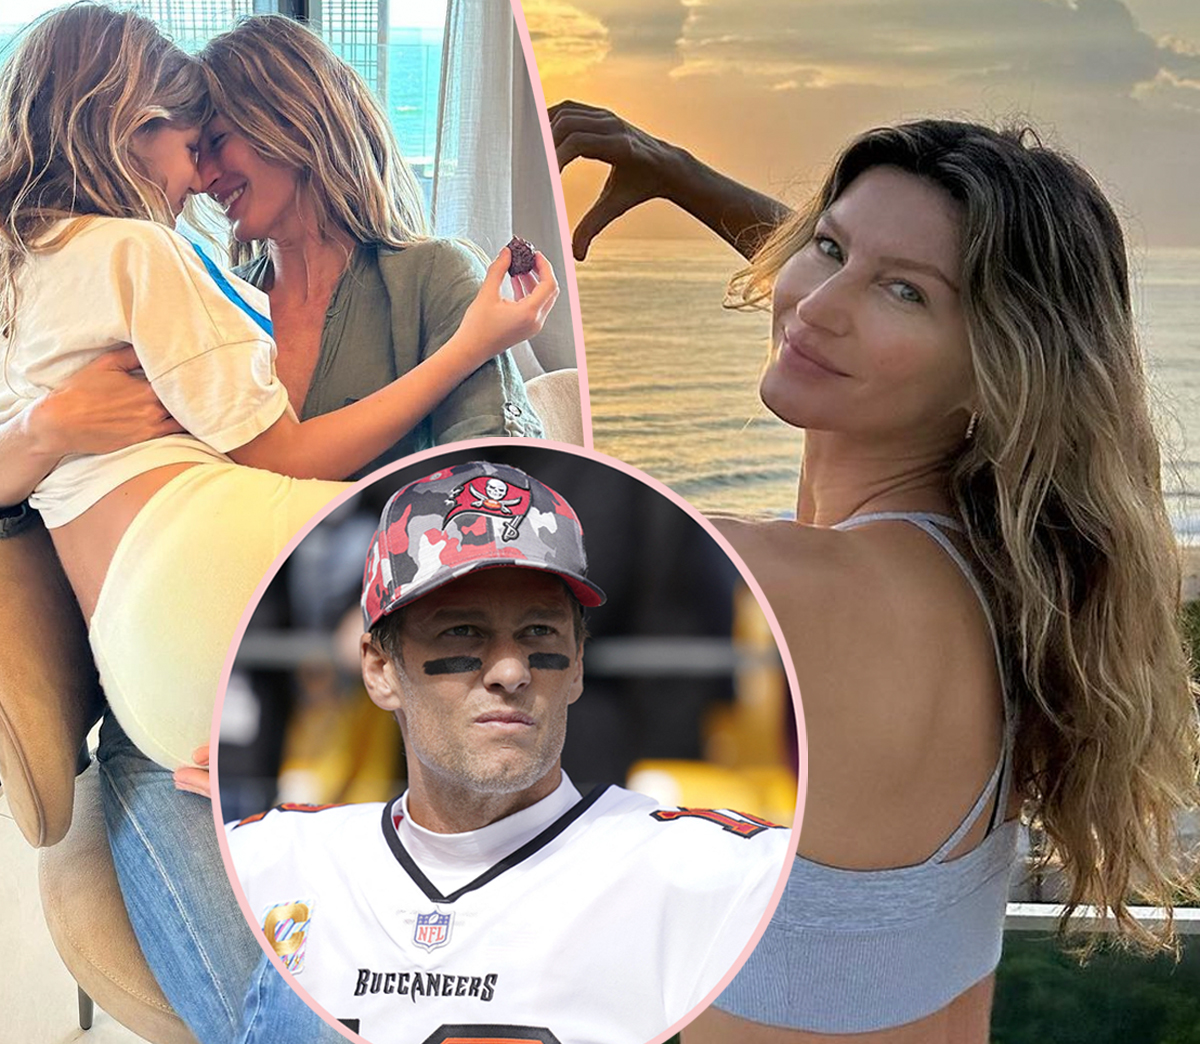 #Gisele Bündchen Says She’s ‘Recharging’ While On Vacation With Kids After Tom Brady Divorce!